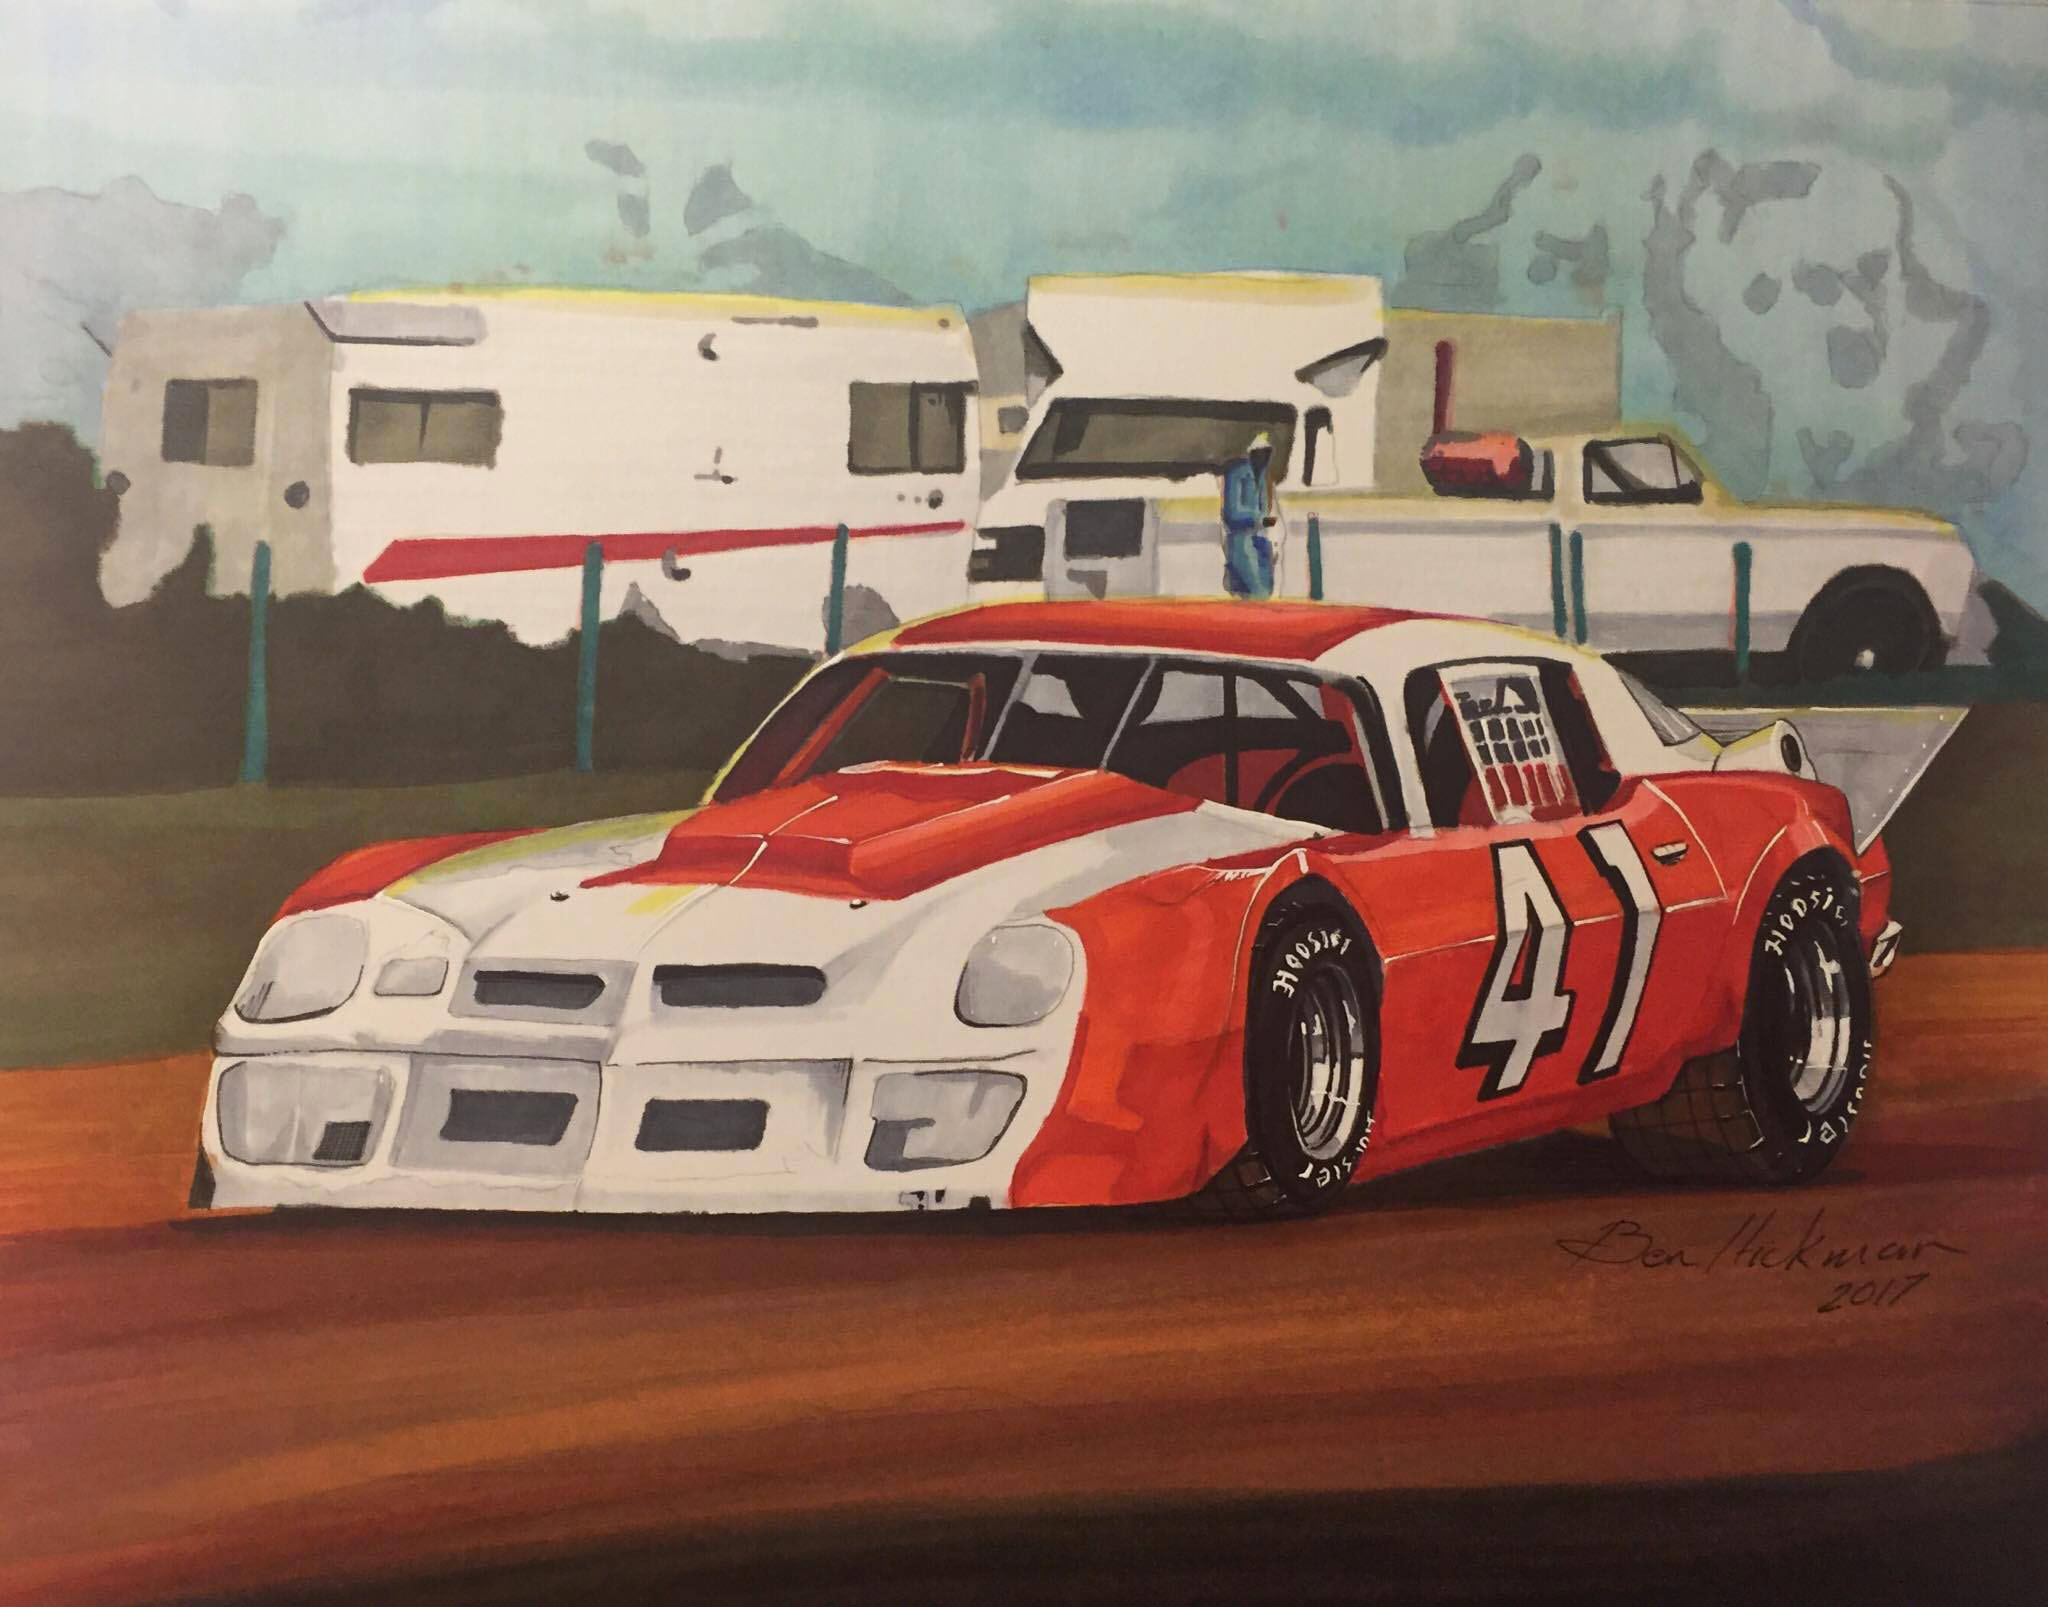 Old F-body race car love the late 70s late models. Copic markers on ...